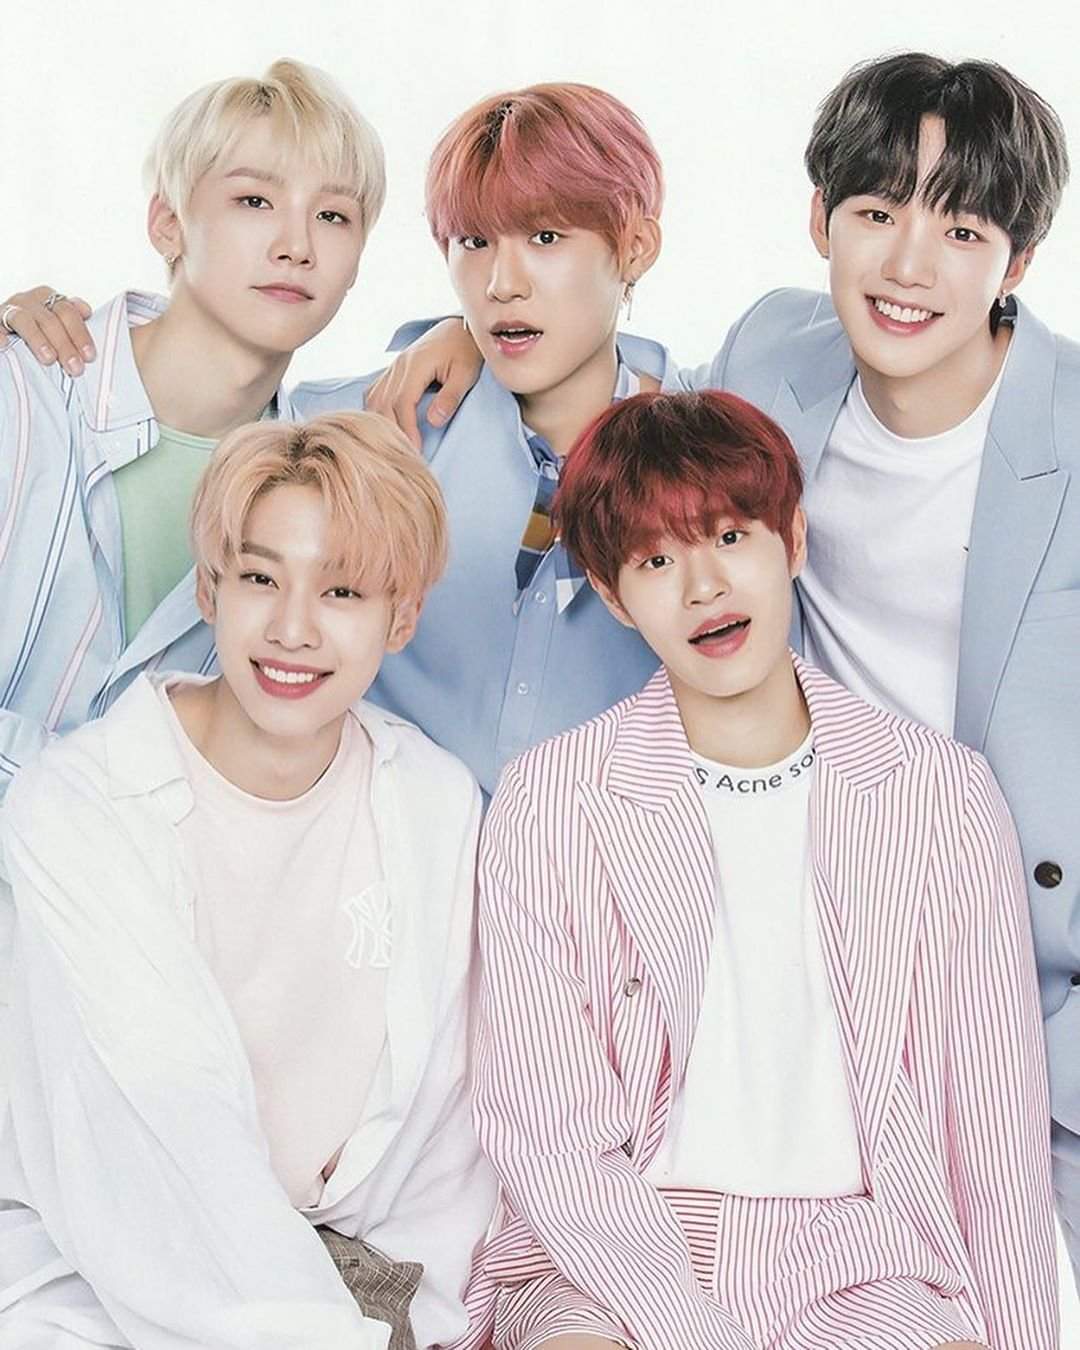 ab6ix-to-make-comeback-with-extended-play-vivid-in-june-2